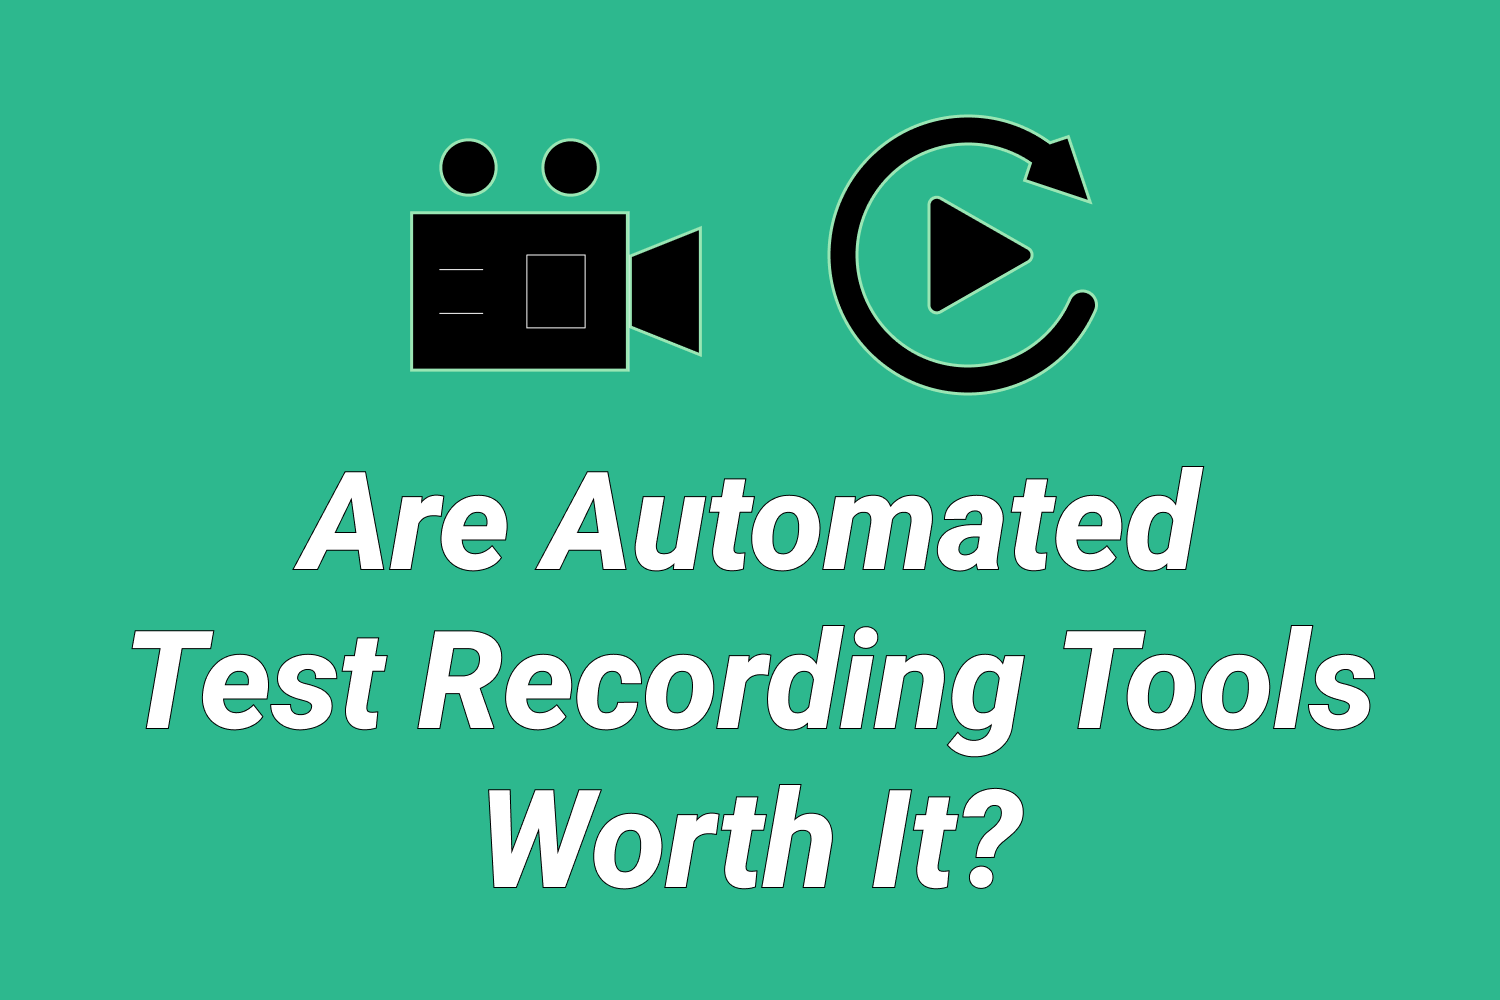 Are Automated Test Recording Tools Worth It?